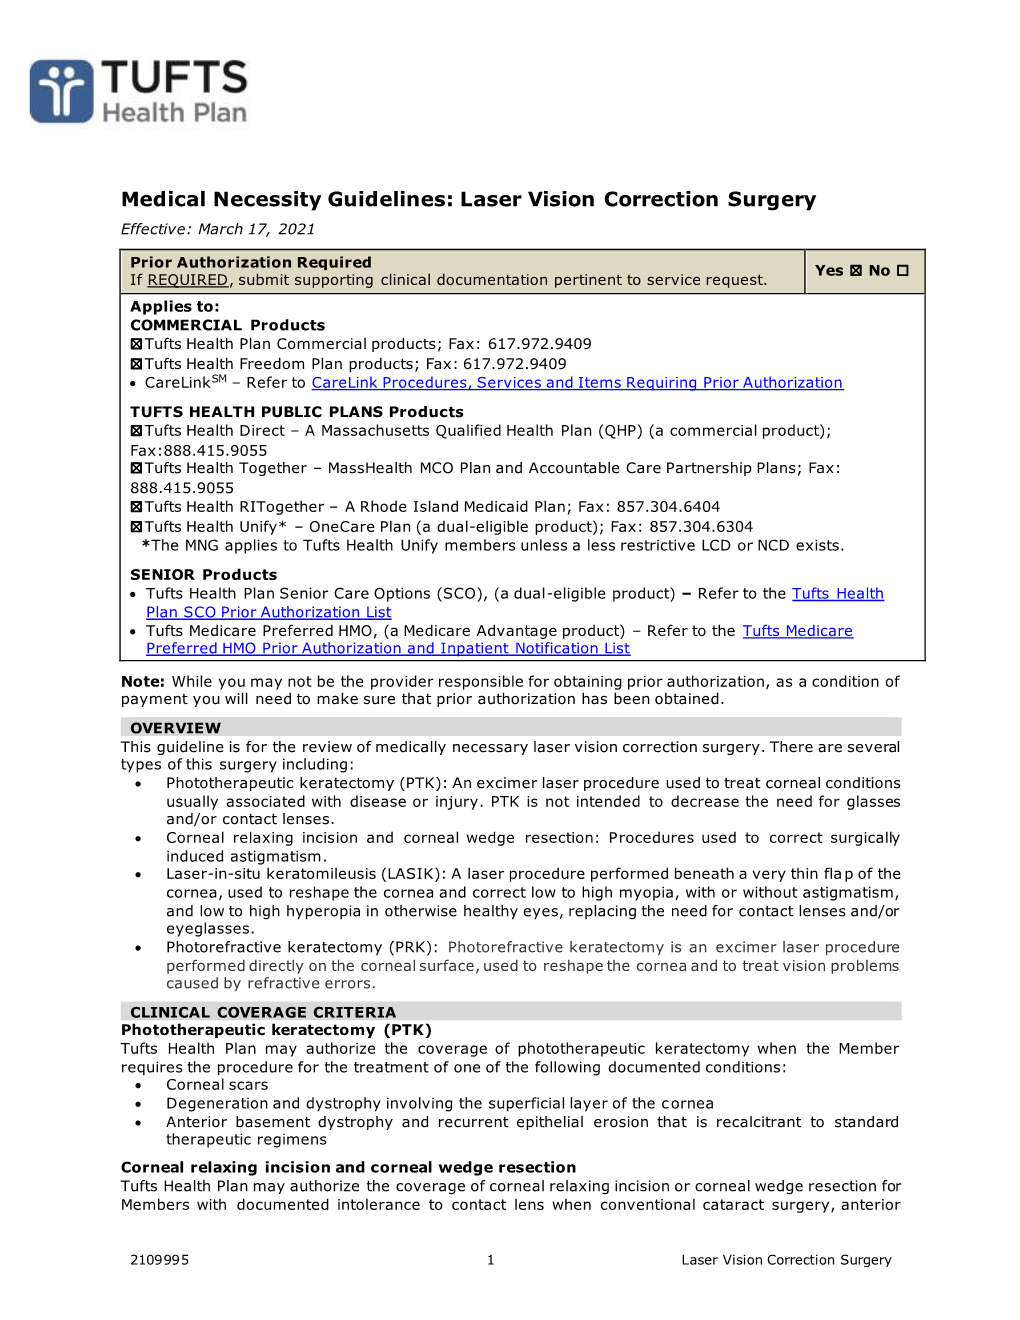 Medical Necessity Guidelines: Laser Vision Correction Surgery Effective: March 17, 2021